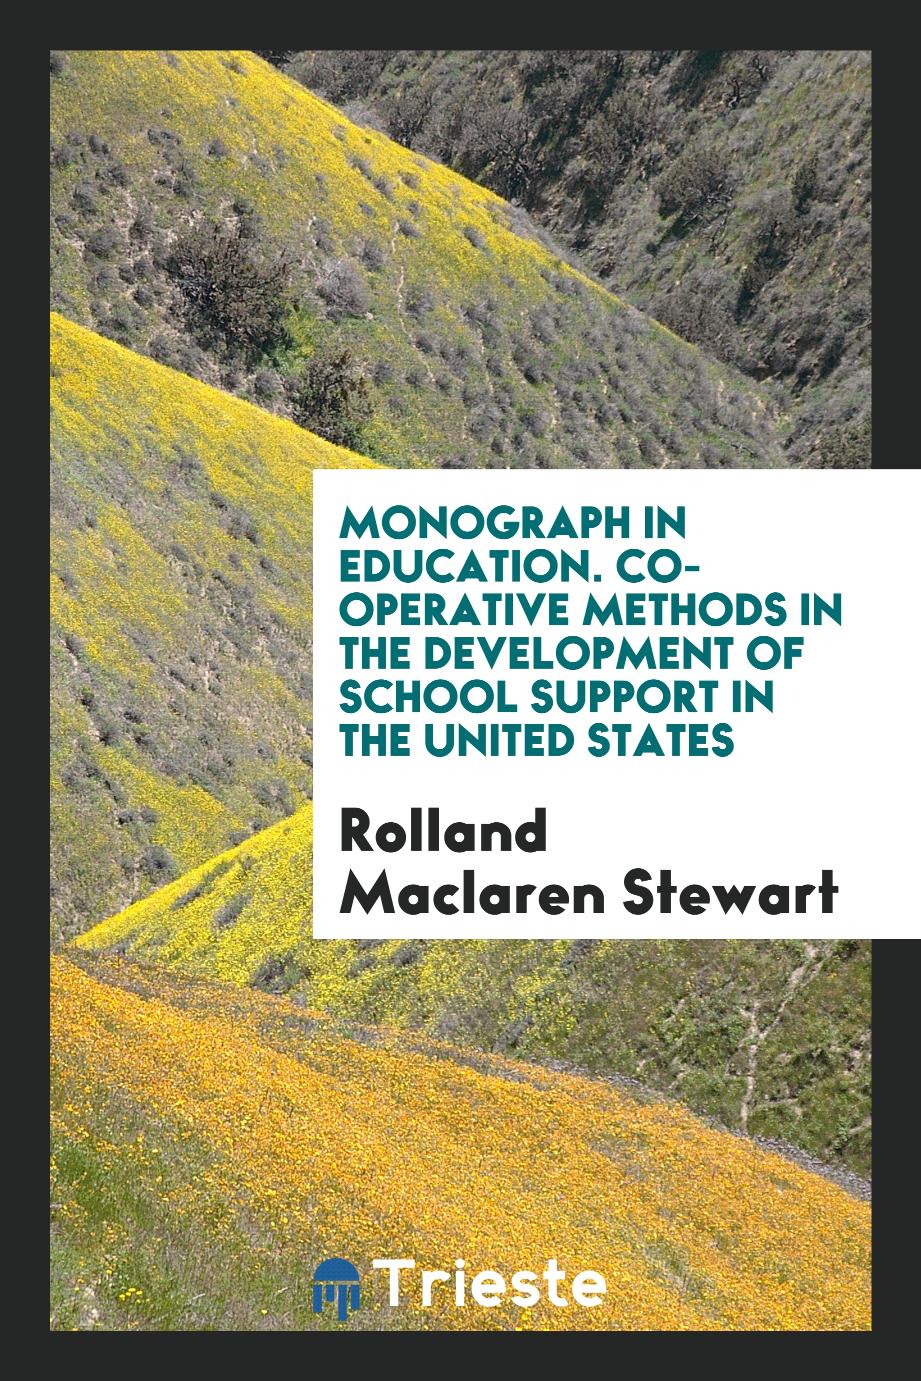 Monograph in Education. Co-Operative Methods in the Development of School Support in the United States